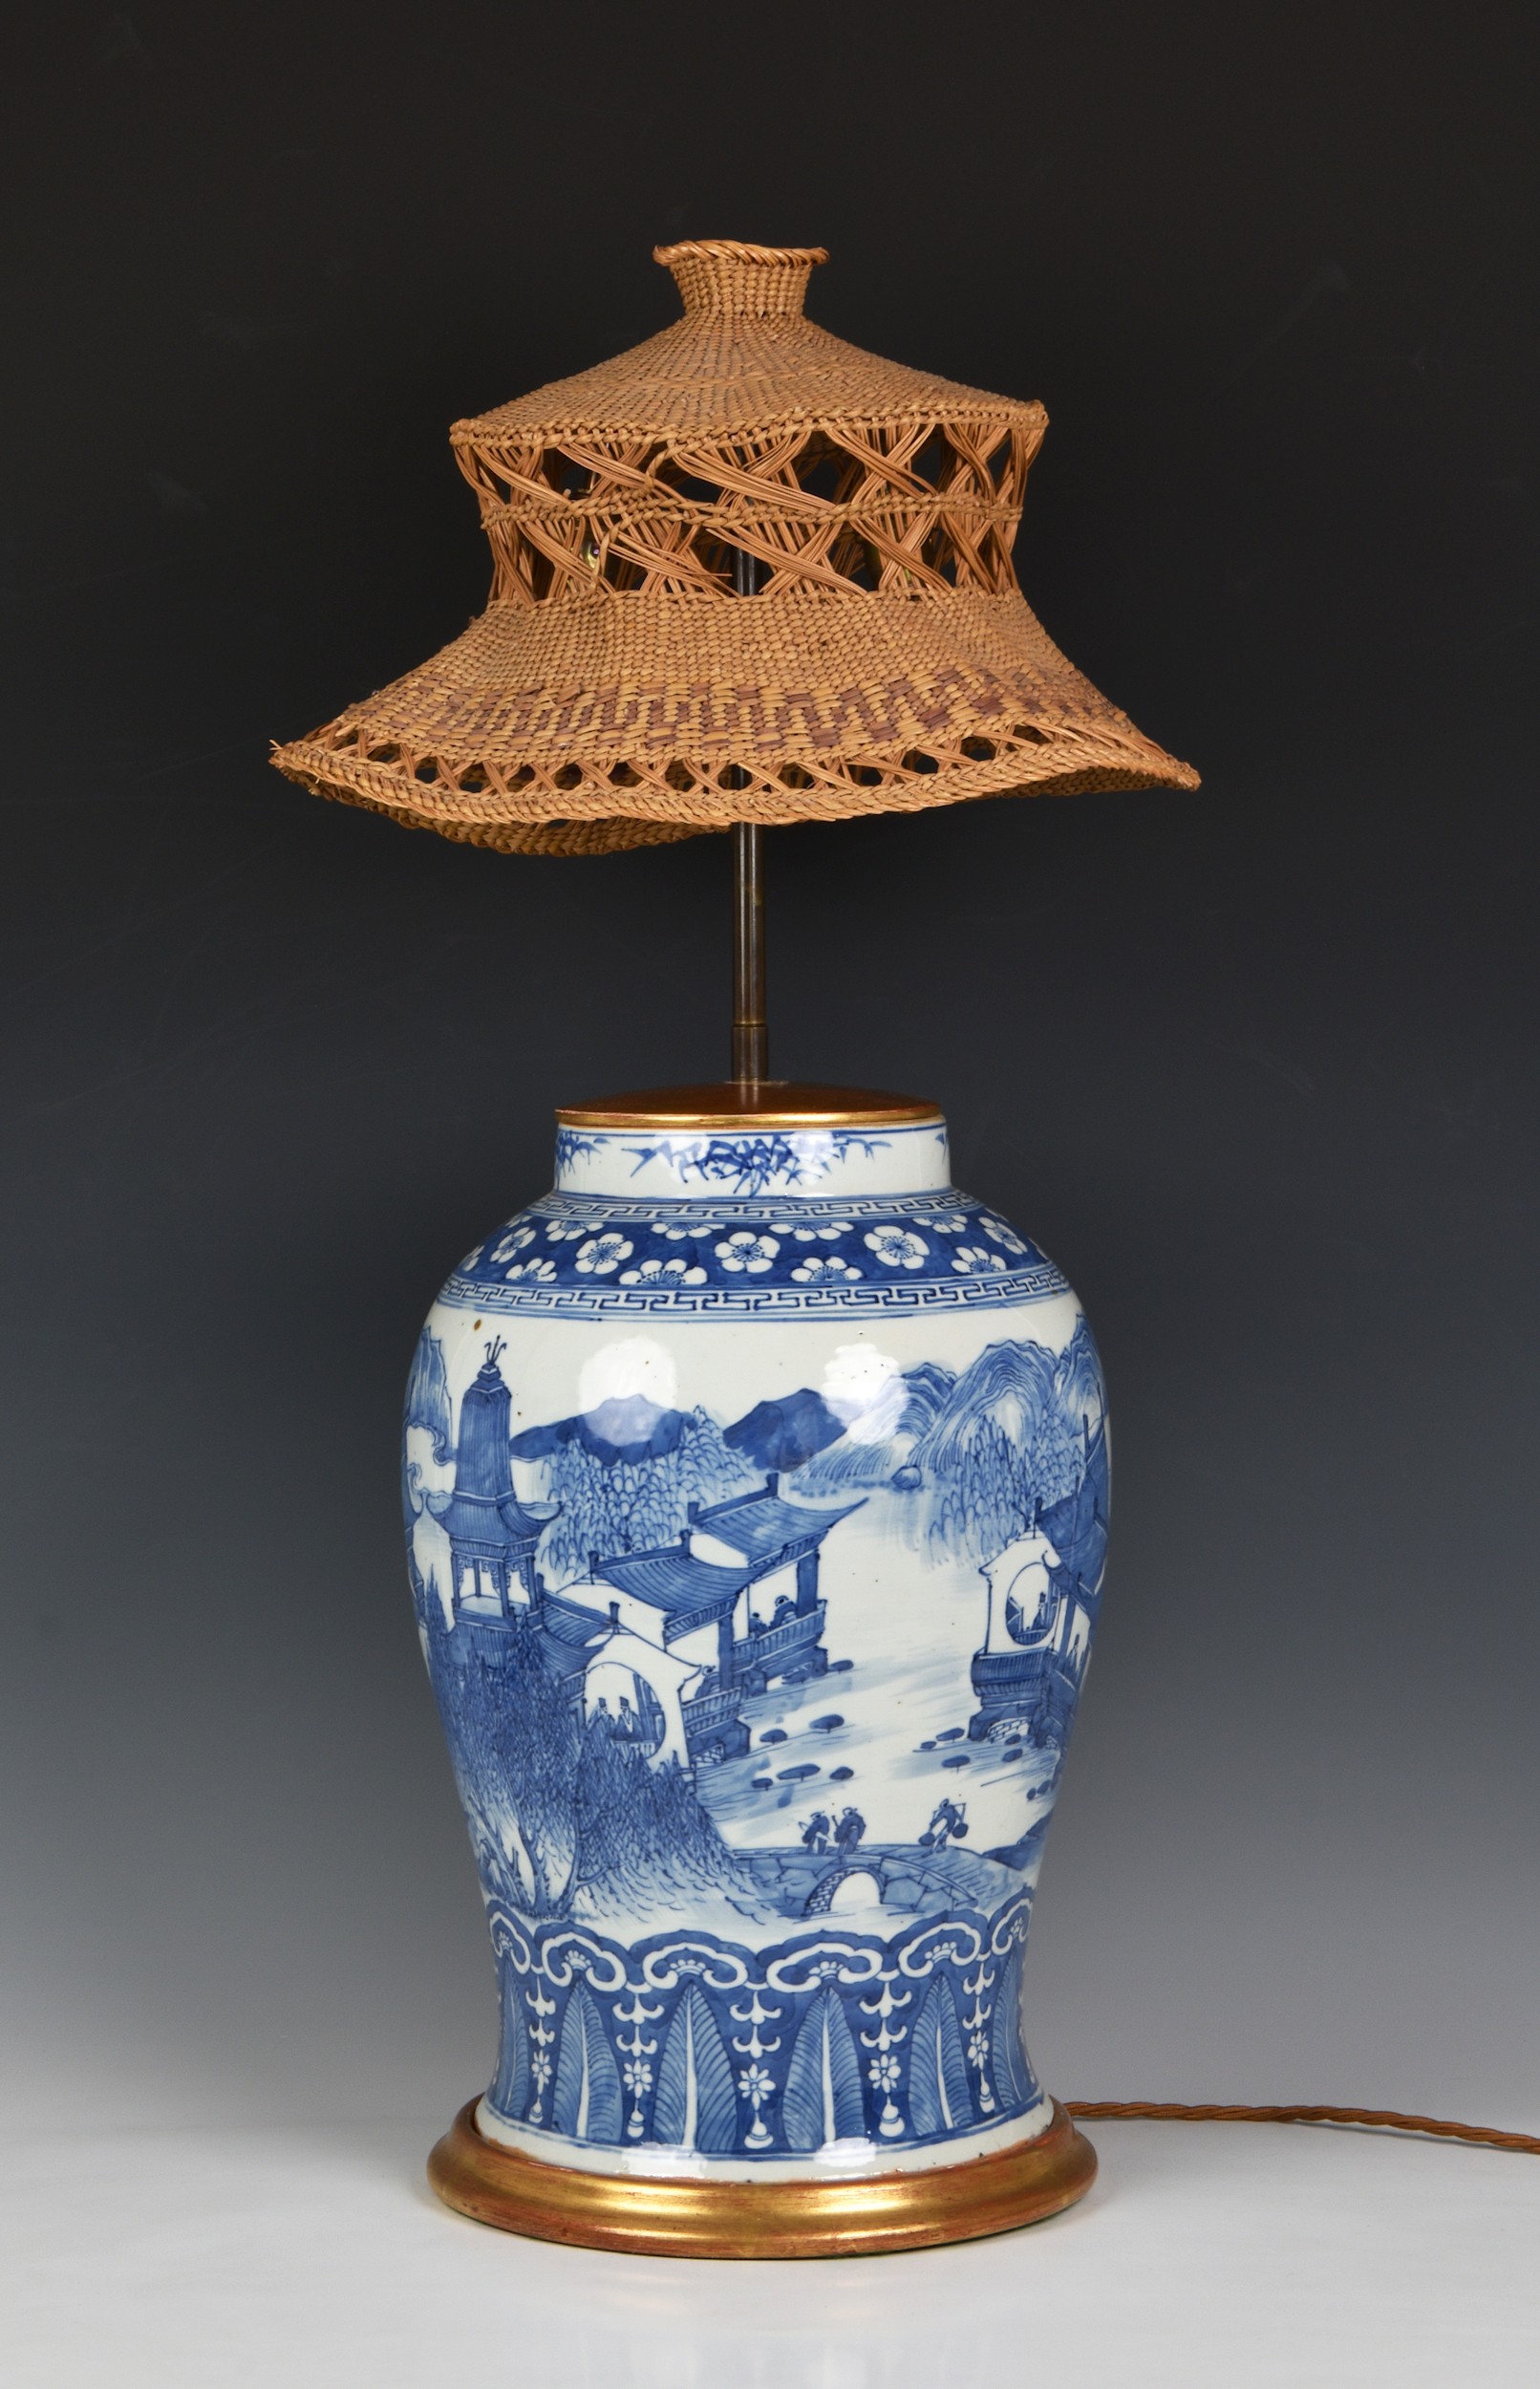 A large Chinese blue and white vase lamp, the vase probably 19th century, of stout baluster form, - Image 6 of 6